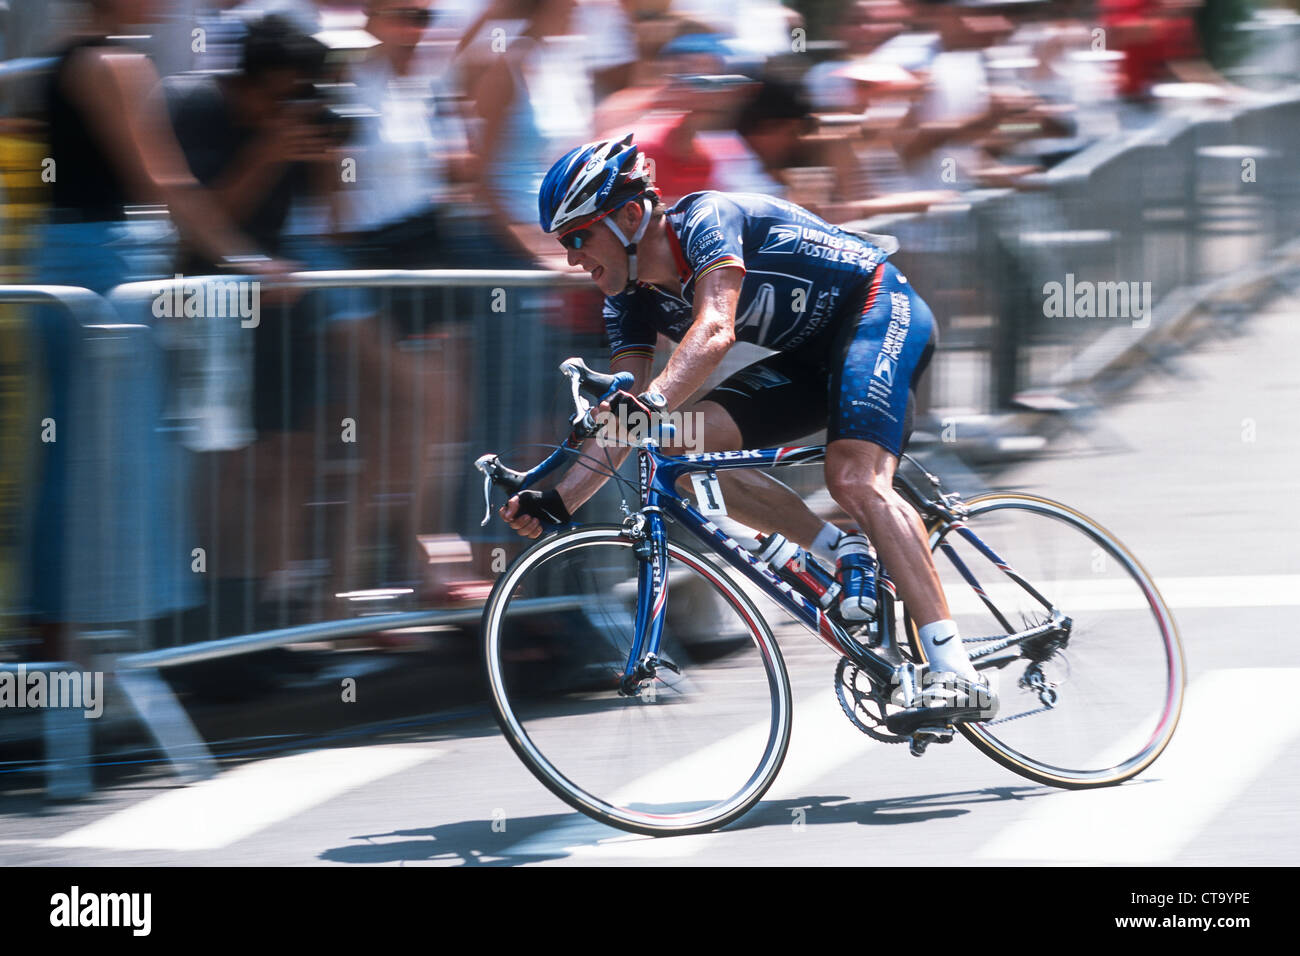 Lance Armstrong competing for the US Postal Service Team at the 2002 New York City Cycling Championships. Stock Photo